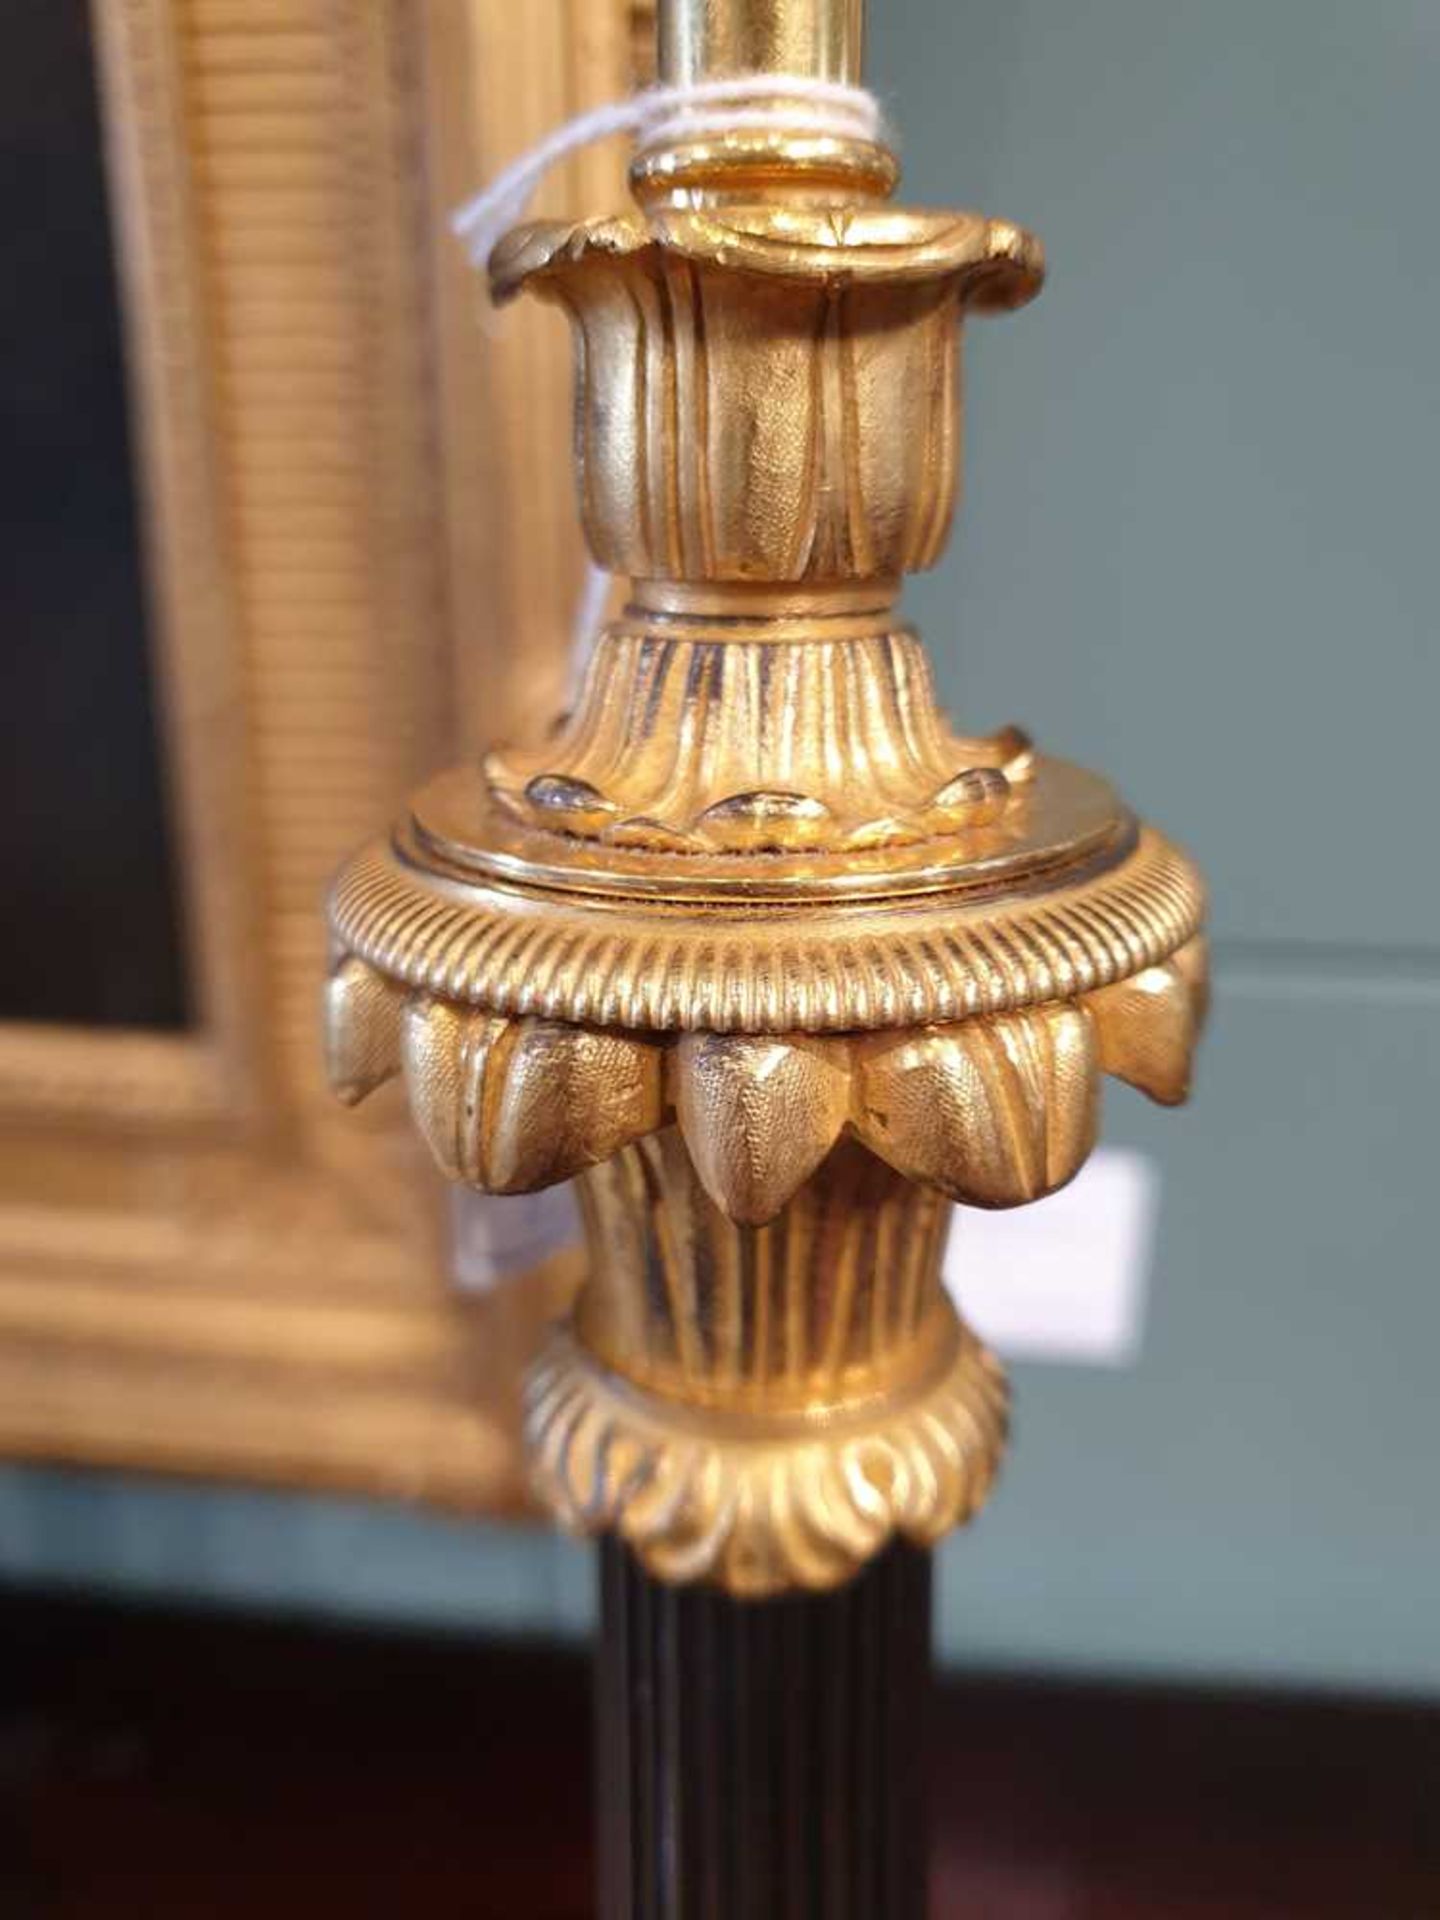 PAIR OF REGENCY PATINATED AND GILT BRONZE CANDLESTICK LAMPS 19TH CENTURY - Image 8 of 13